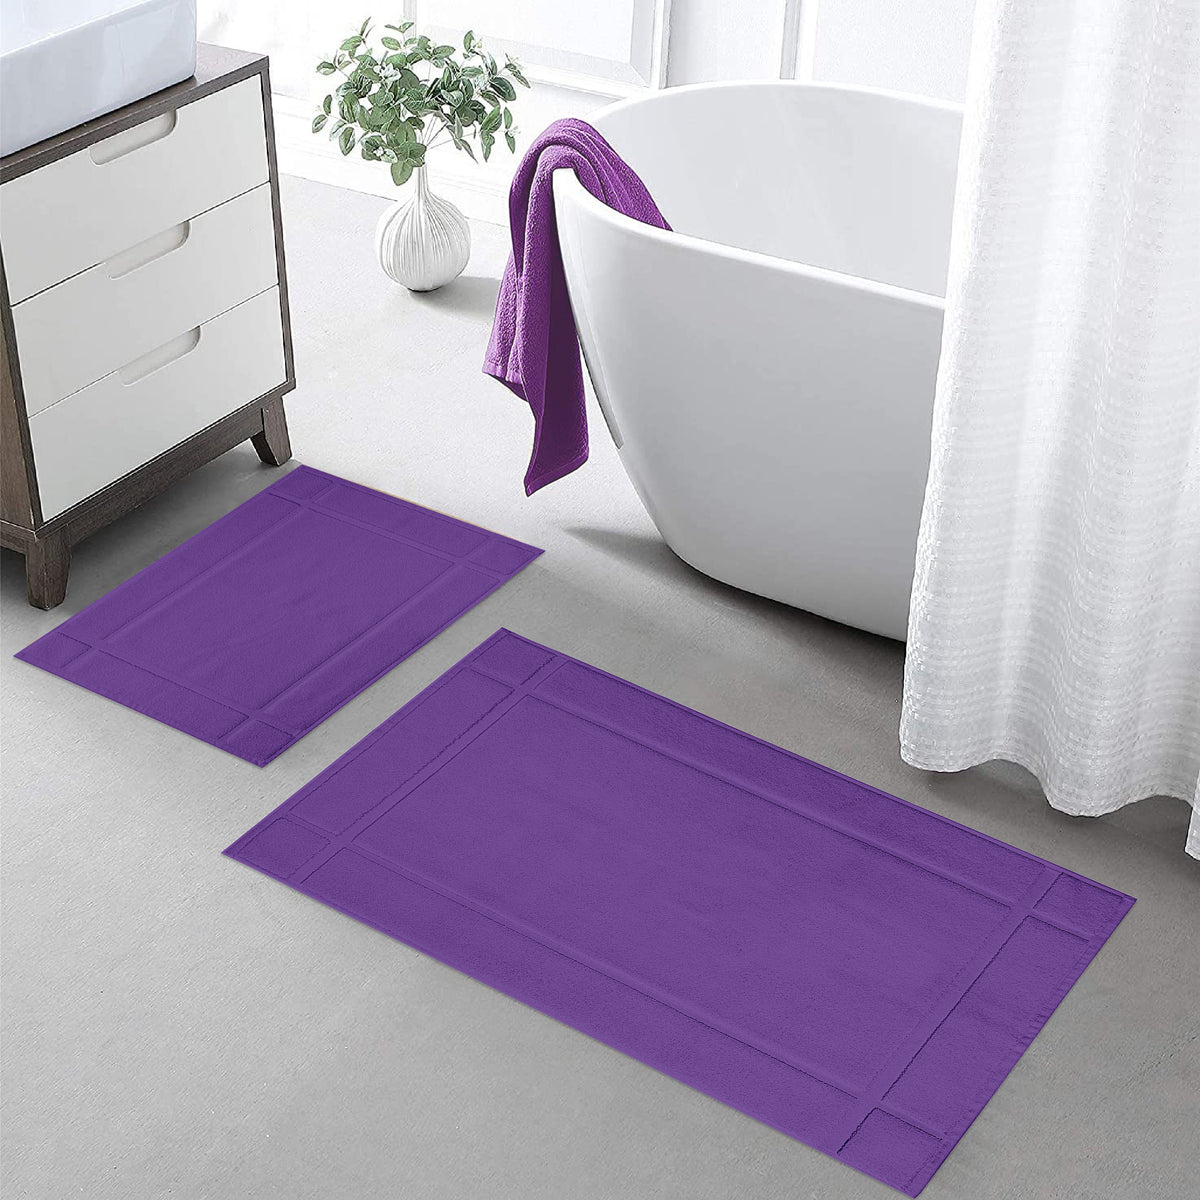 Set of 2 24"X17" & 34"X20" Cotton Bath Mats 1350 GSM Solid Thick & Plush, for Bathroom Floor